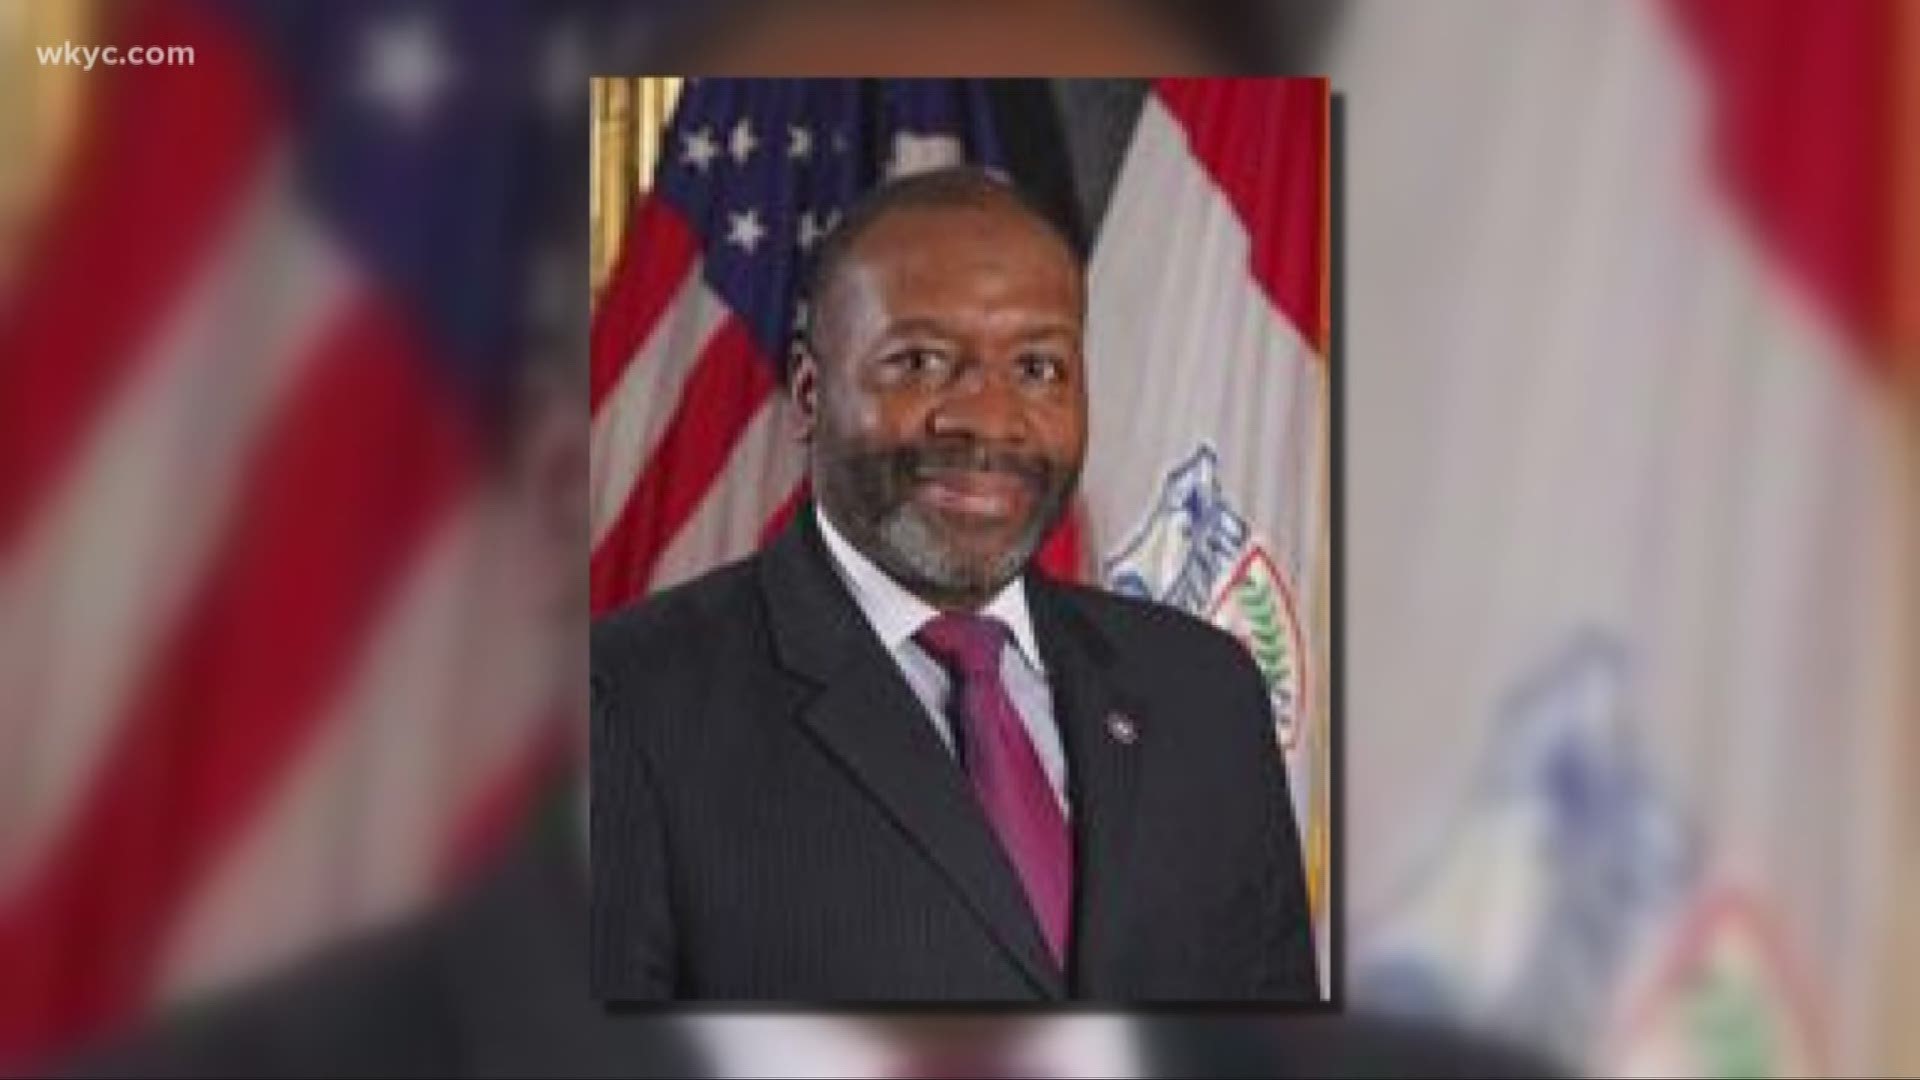 Investigator ' Commissioner and Mayor's cabinet member investigated for airport security breach